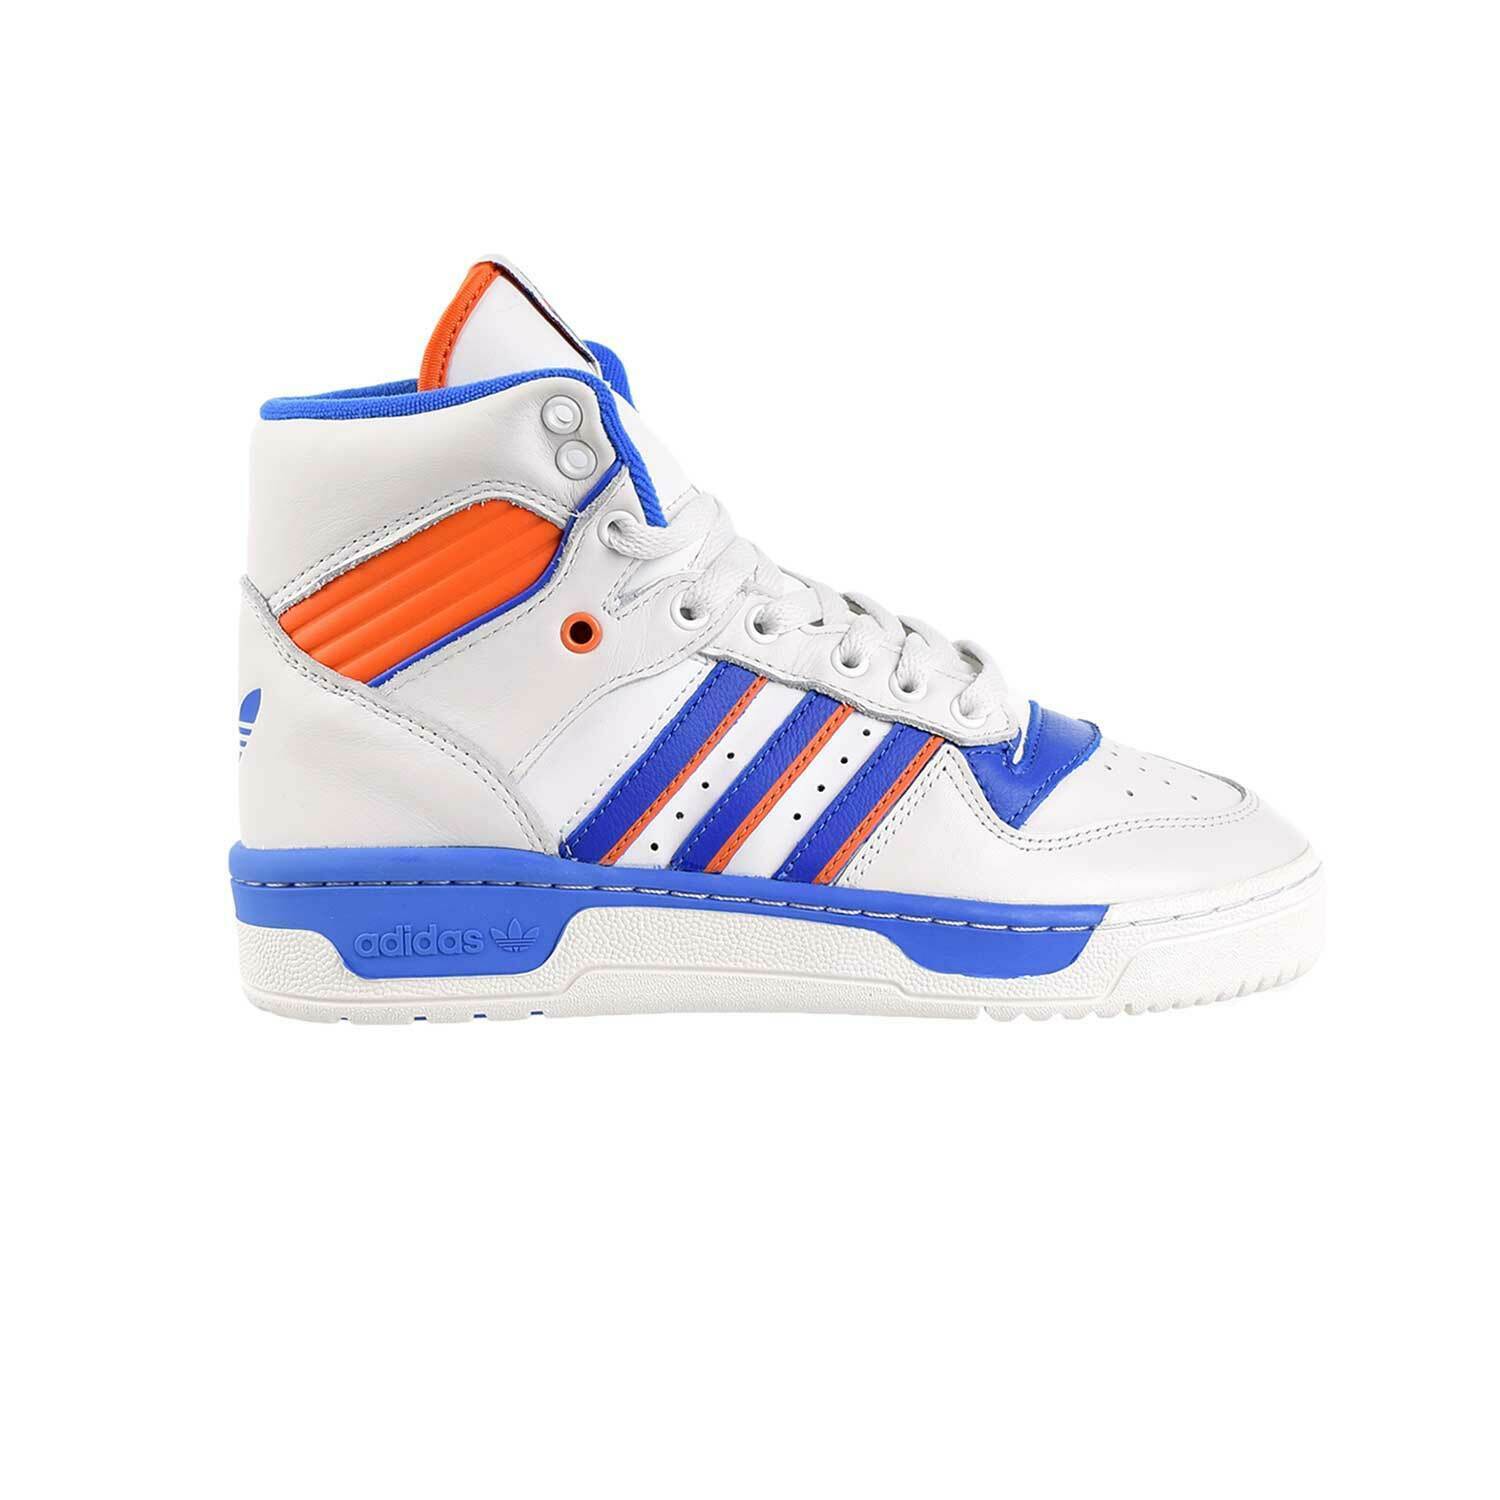 Adidas Rivalry Mens Shoes Crystal White-Blue-Orange f34139 - Athletic